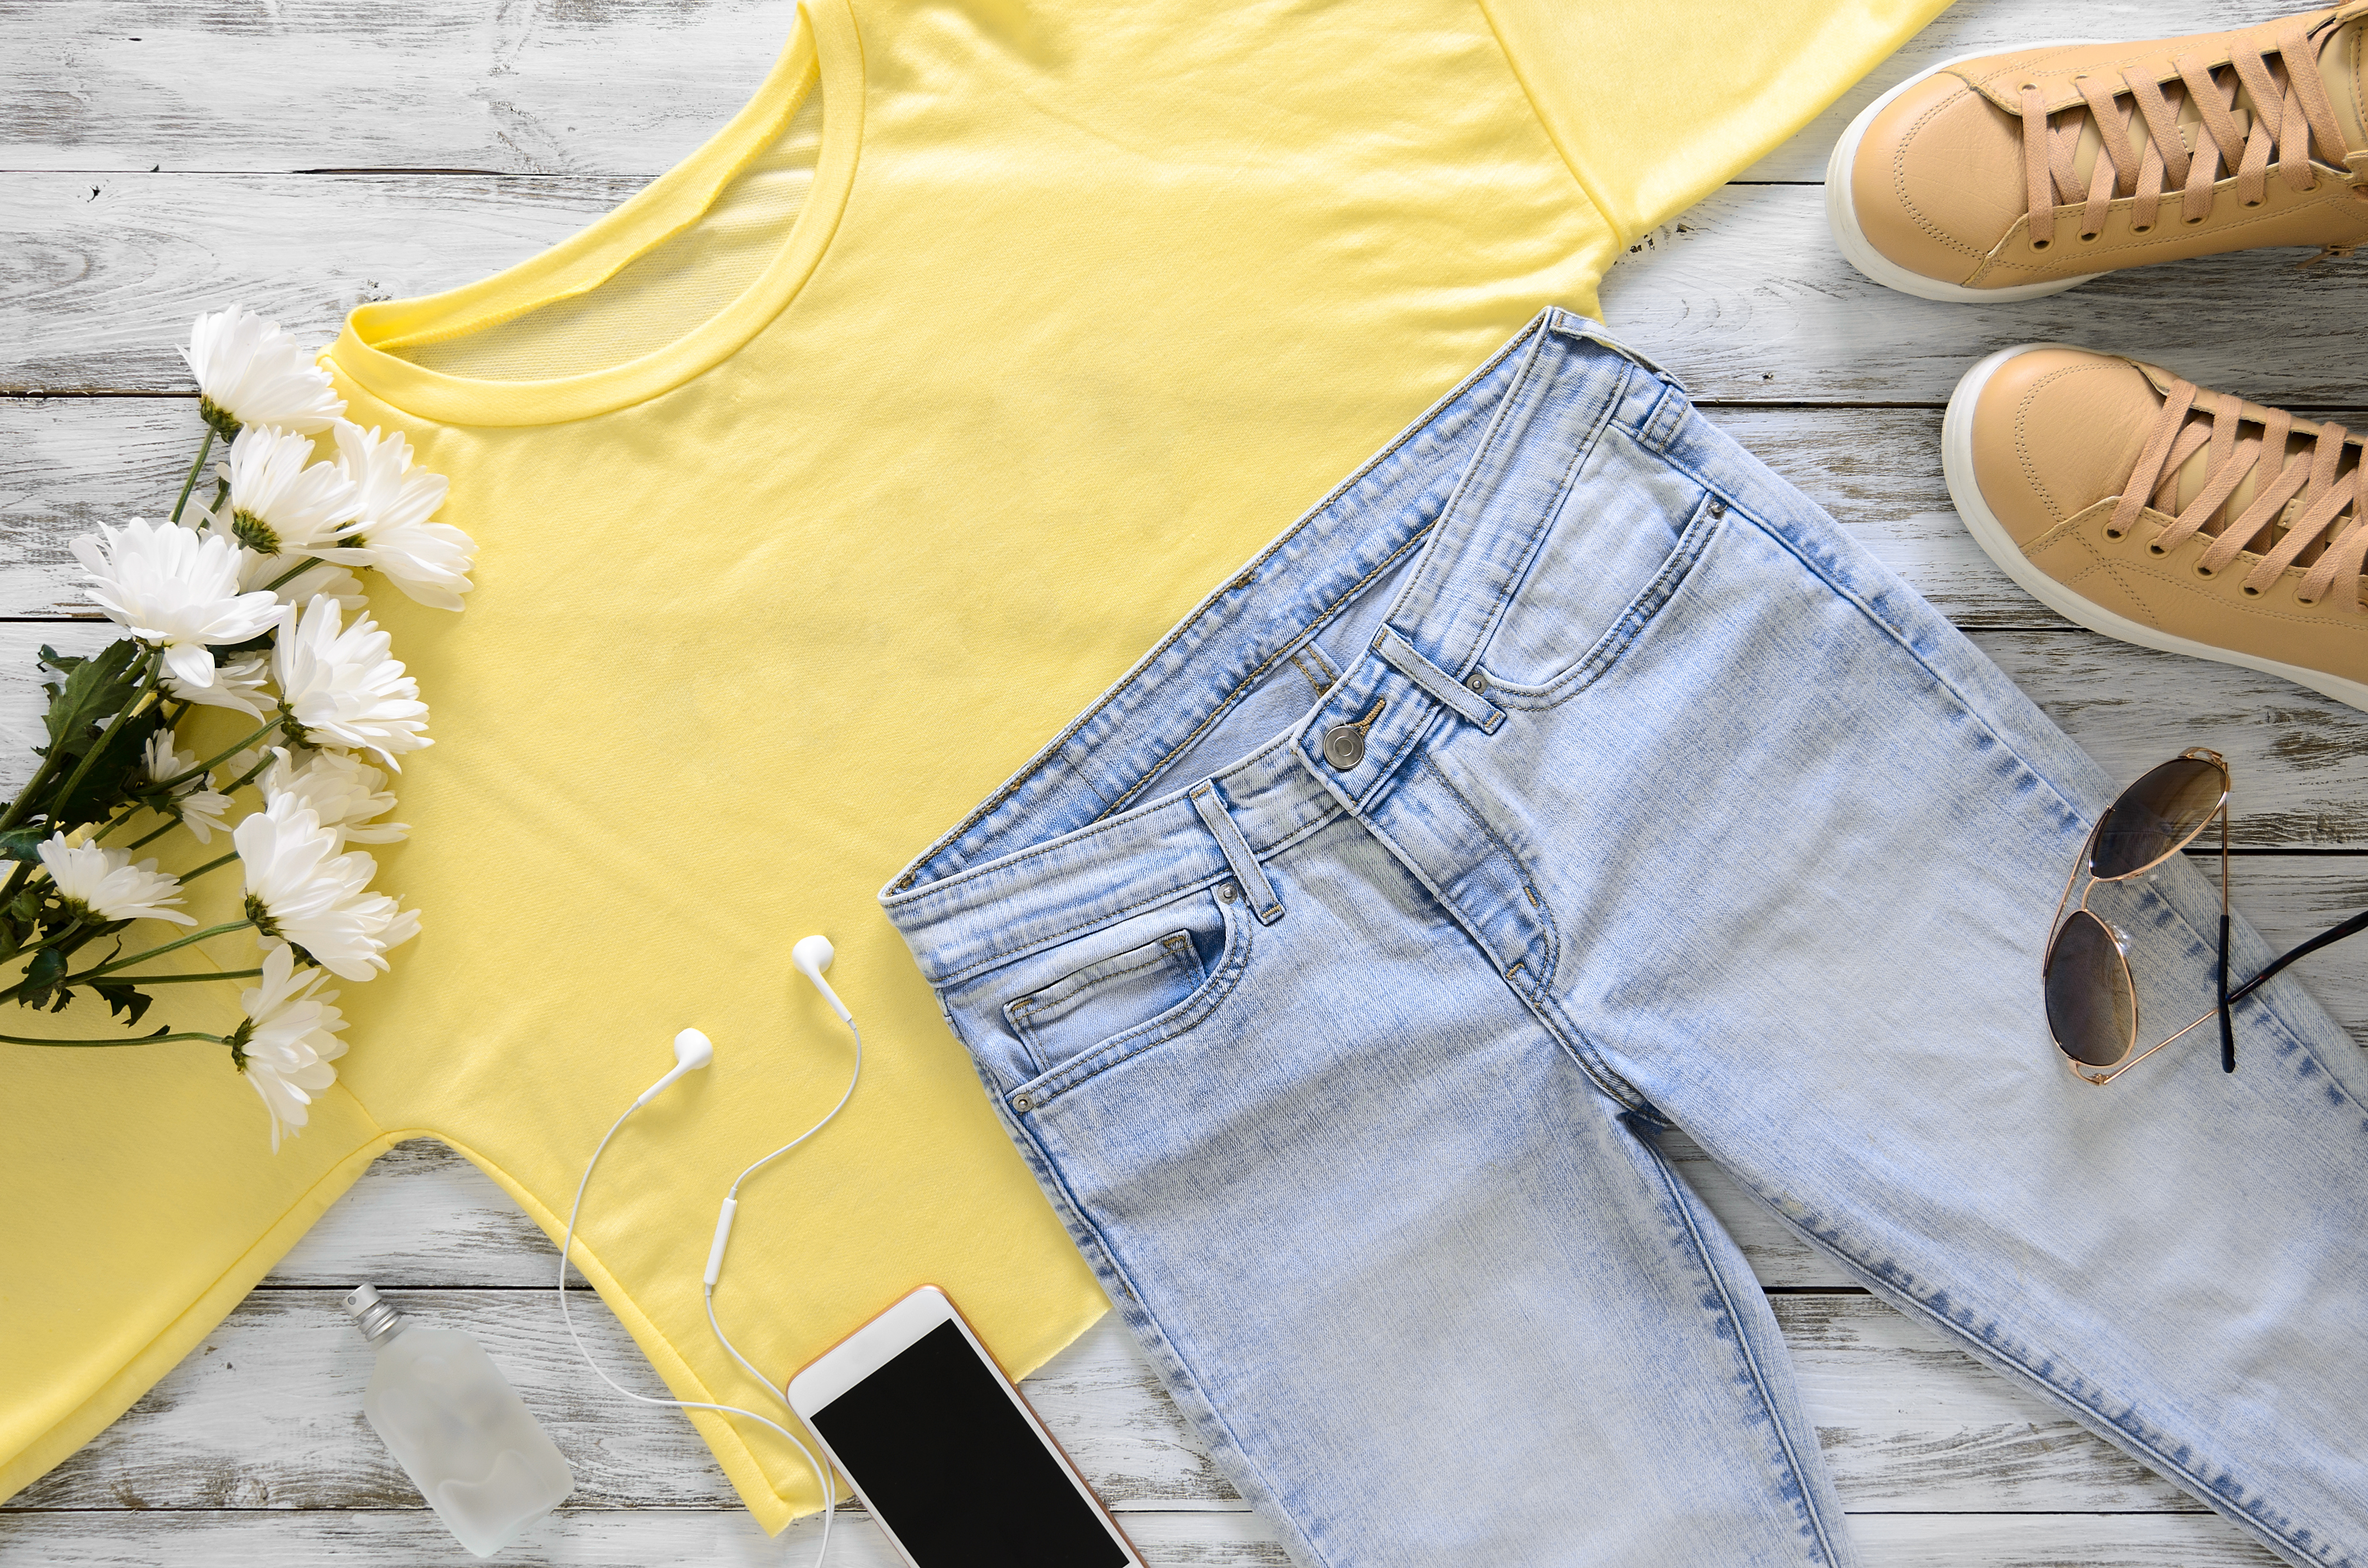 Womens fashion clothing, shoes and accessories (beige leather sneakers, blue jeans, yellow top (long sleeve t-shirt) headphones, cell phone, perfume, sunglasses. Fashion concept. View from above, Flat lay. Spring summer season